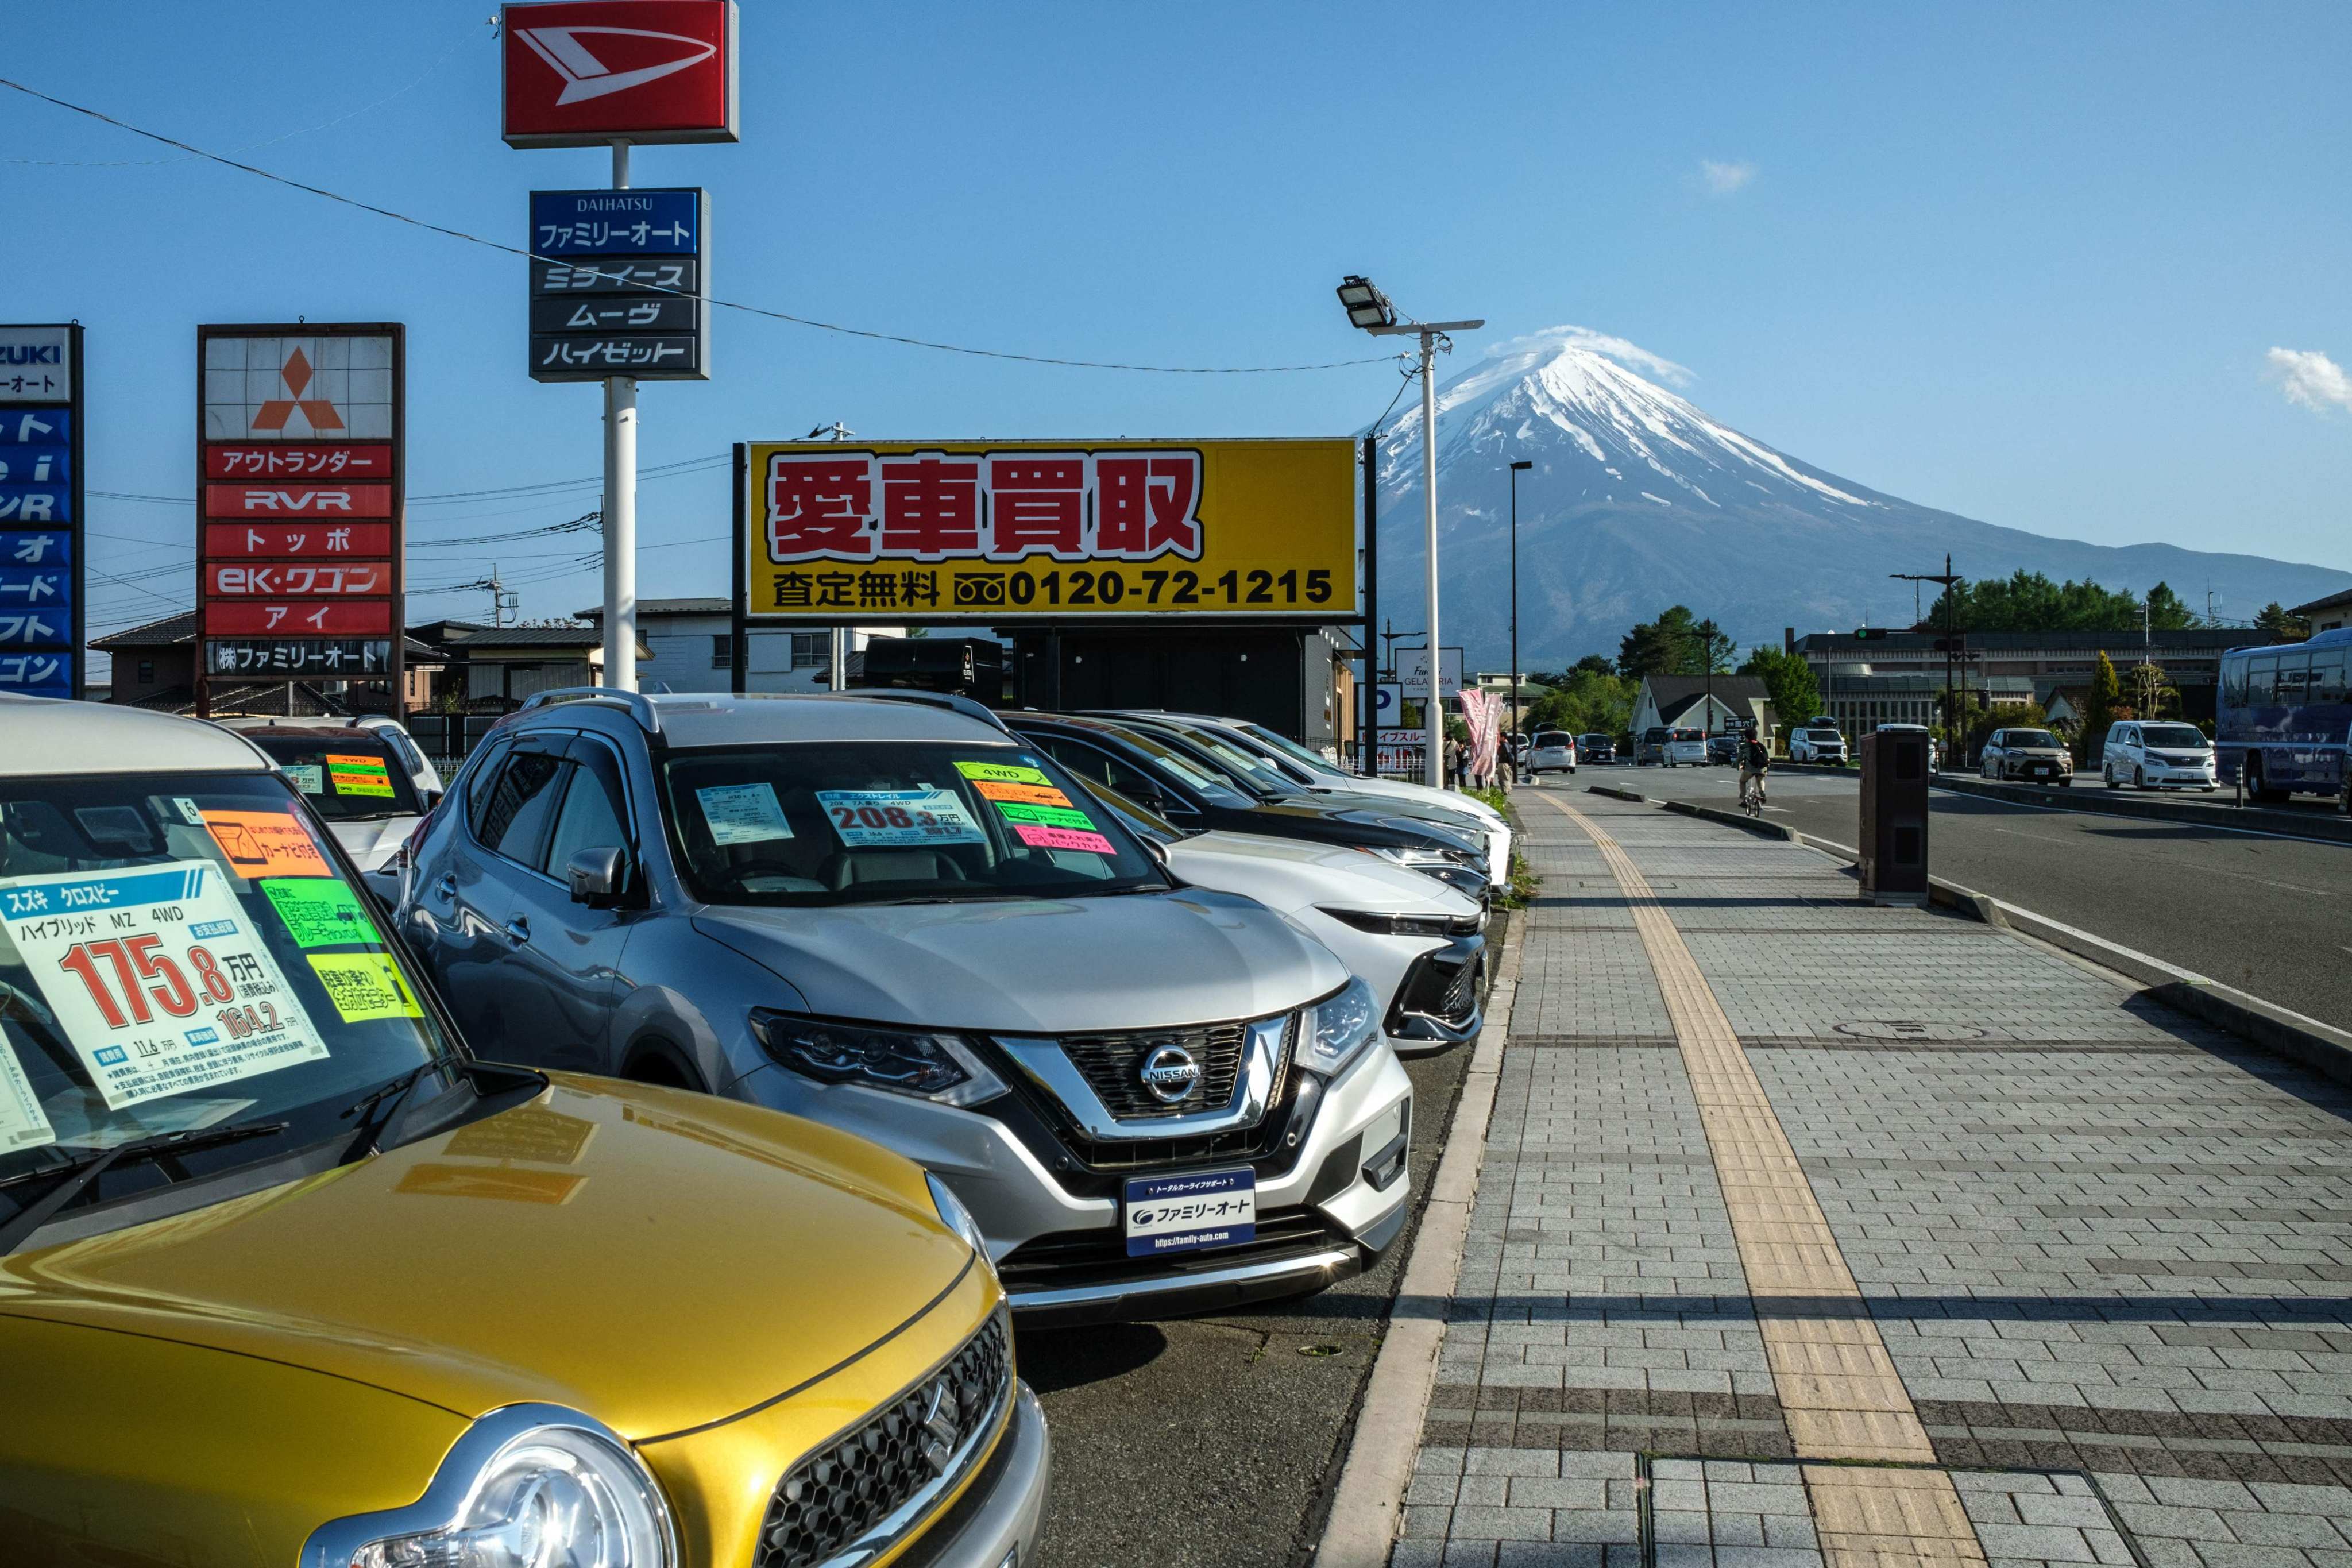 Work has begun in a small Japanese town to erect a barrier blocking views of the country’s most famous sight, Mount Fuji, after locals complained of bad behaviour by photo-hungry tourists. Photo: AFP